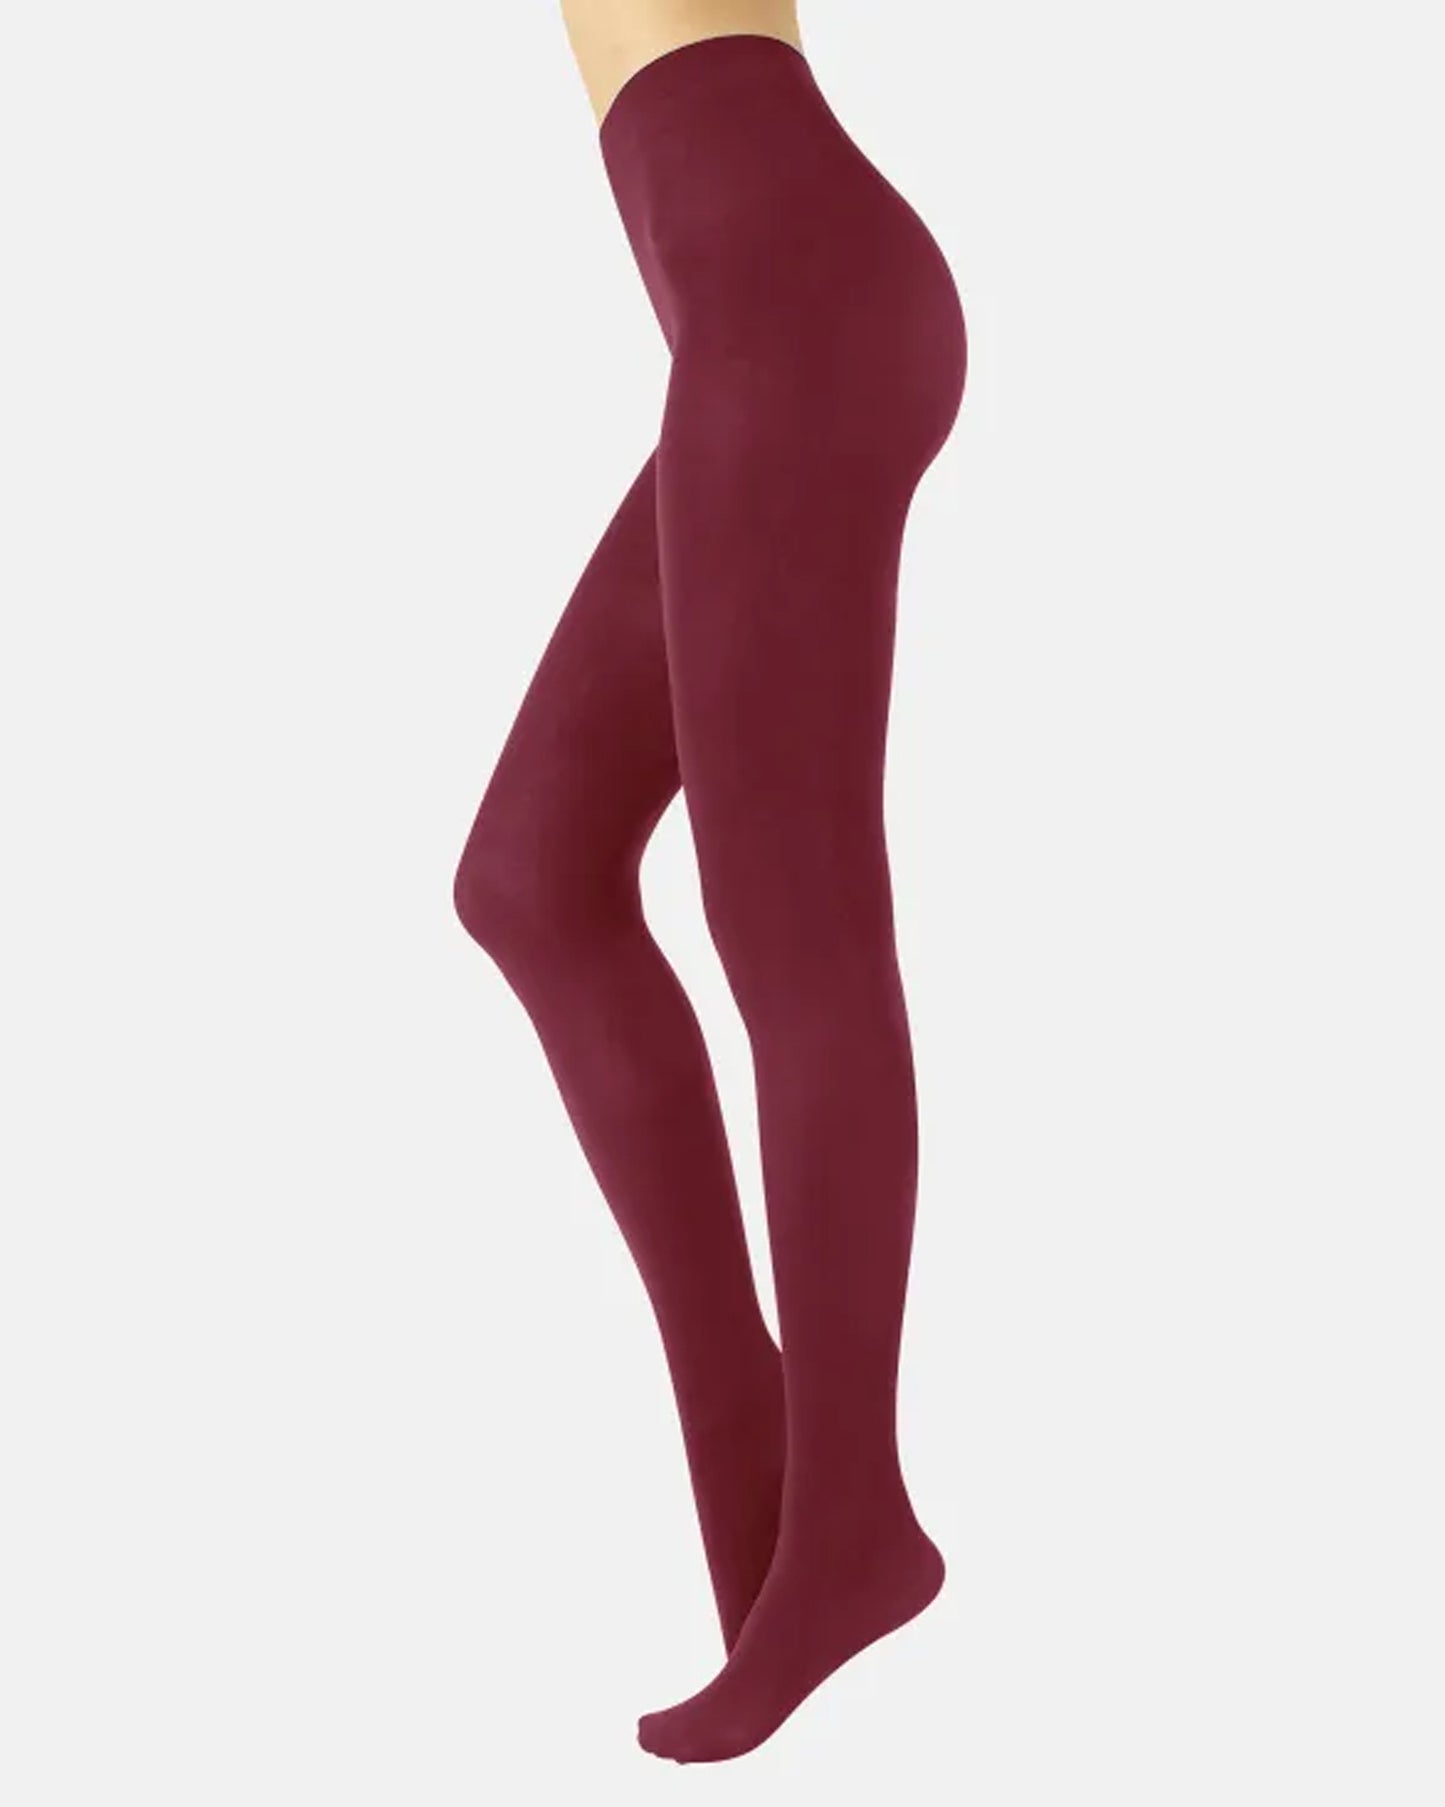 Calzitaly Cotton Tights - Warm and wine knitted cotton mix tights with gusset, flat seams and comfort waist band.